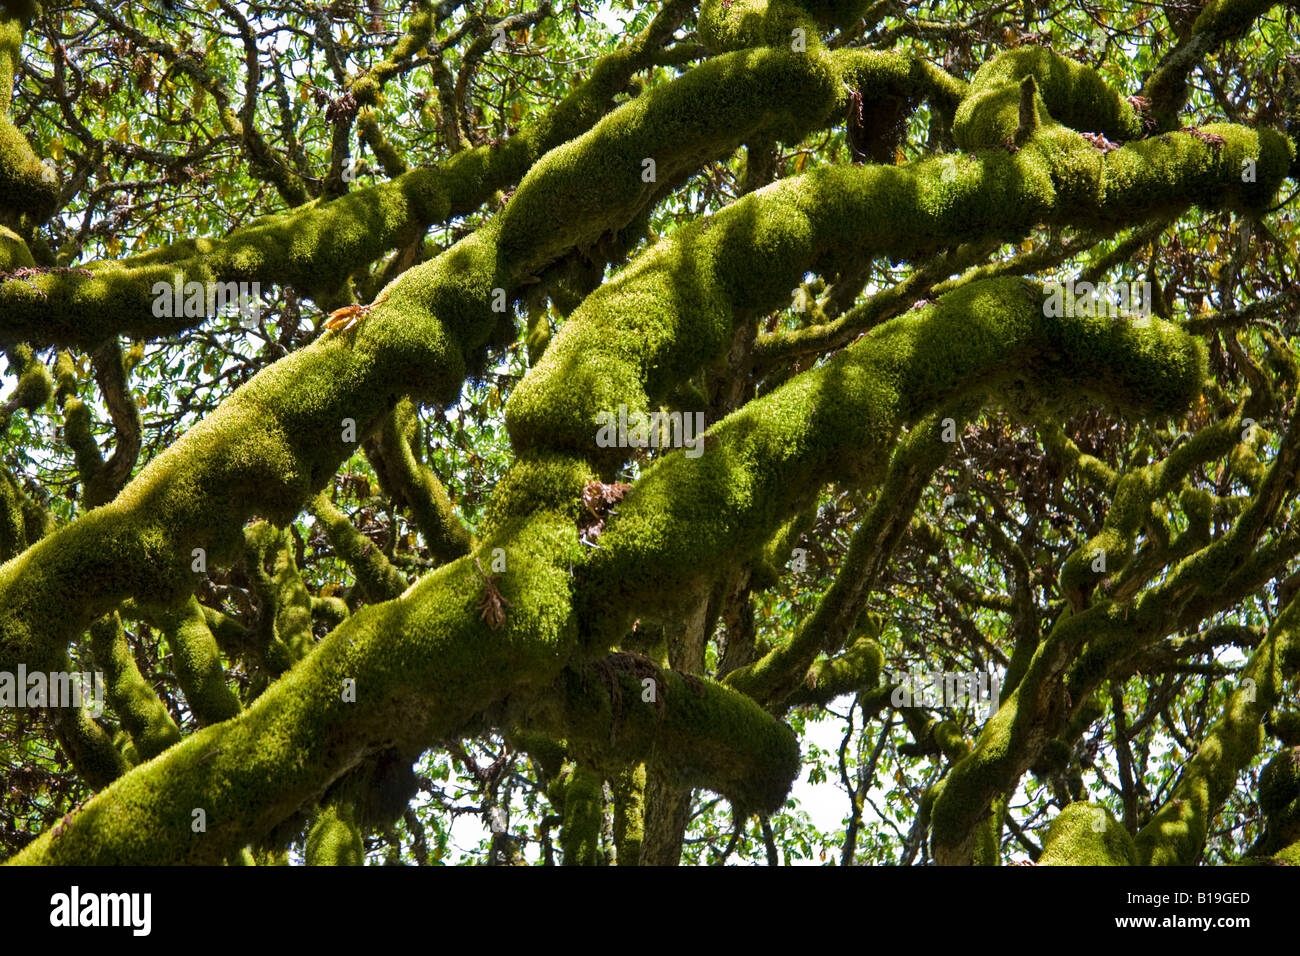 Kenya, Kenya Highlands. Moss growing on Hagenia trees (Hagenia abyssinica) at over 10,000 feet above sea level on the moorlands. Stock Photo